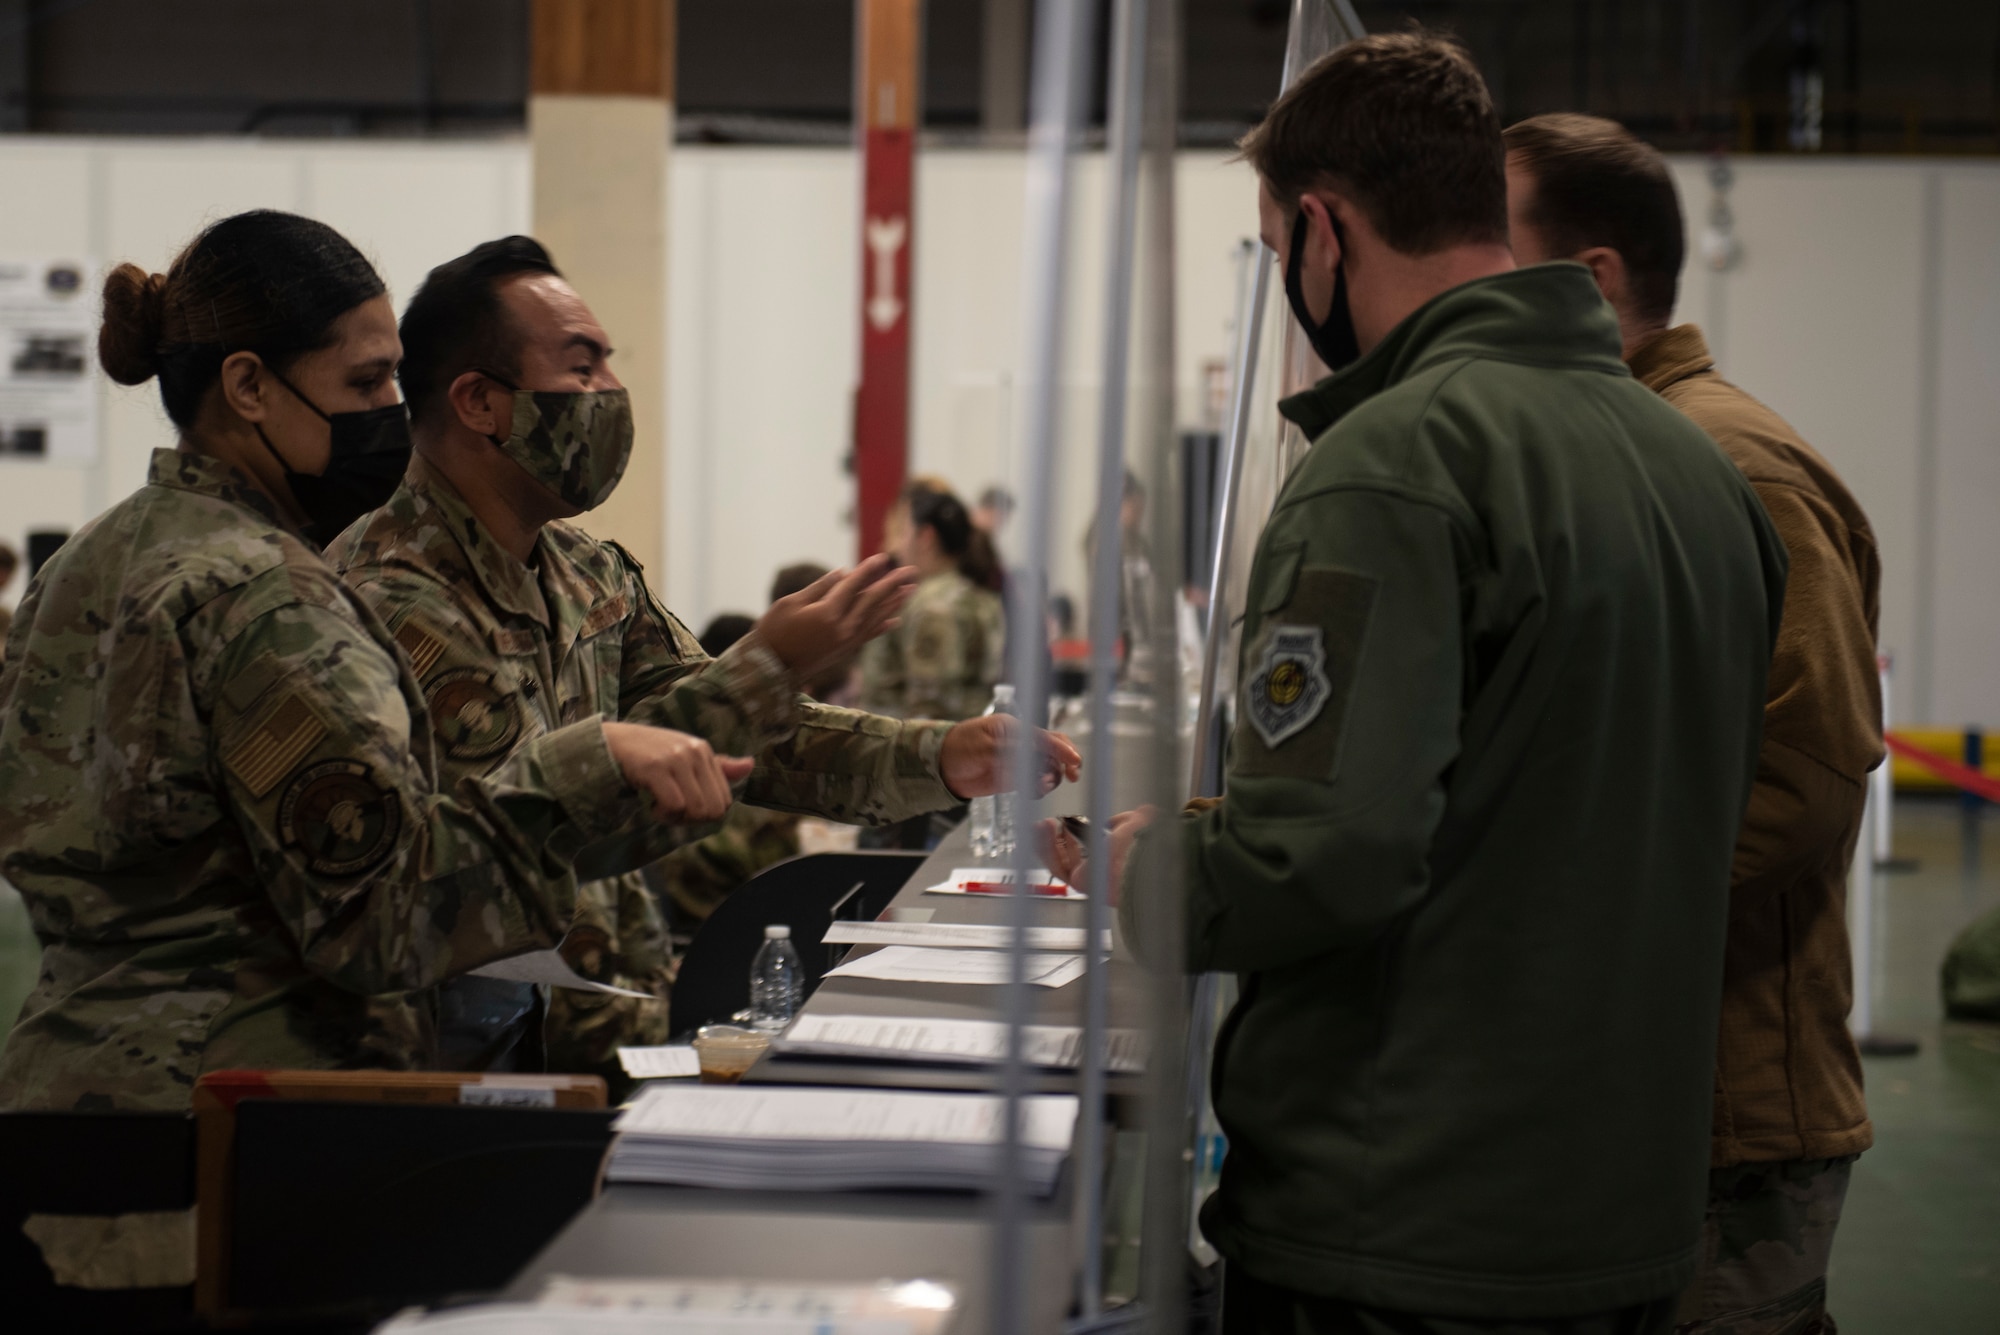 U.S. Air Force Airmen process through the deployment line as part of Exercise Rainier War 22A at Joint Base Lewis-McChord, Washington, March 15, 2022. Rainier War 22A exercised and evaluated the wing’s ability to employ the force and its  ability to perform during wartime and/or contingency taskings in a high-intensity, wartime contested, degraded and operationally limited environment while supporting the contingency operations against a near-peer adversary. (U.S. Air Force photo by Master Sgt. Julius Delos Reyes)